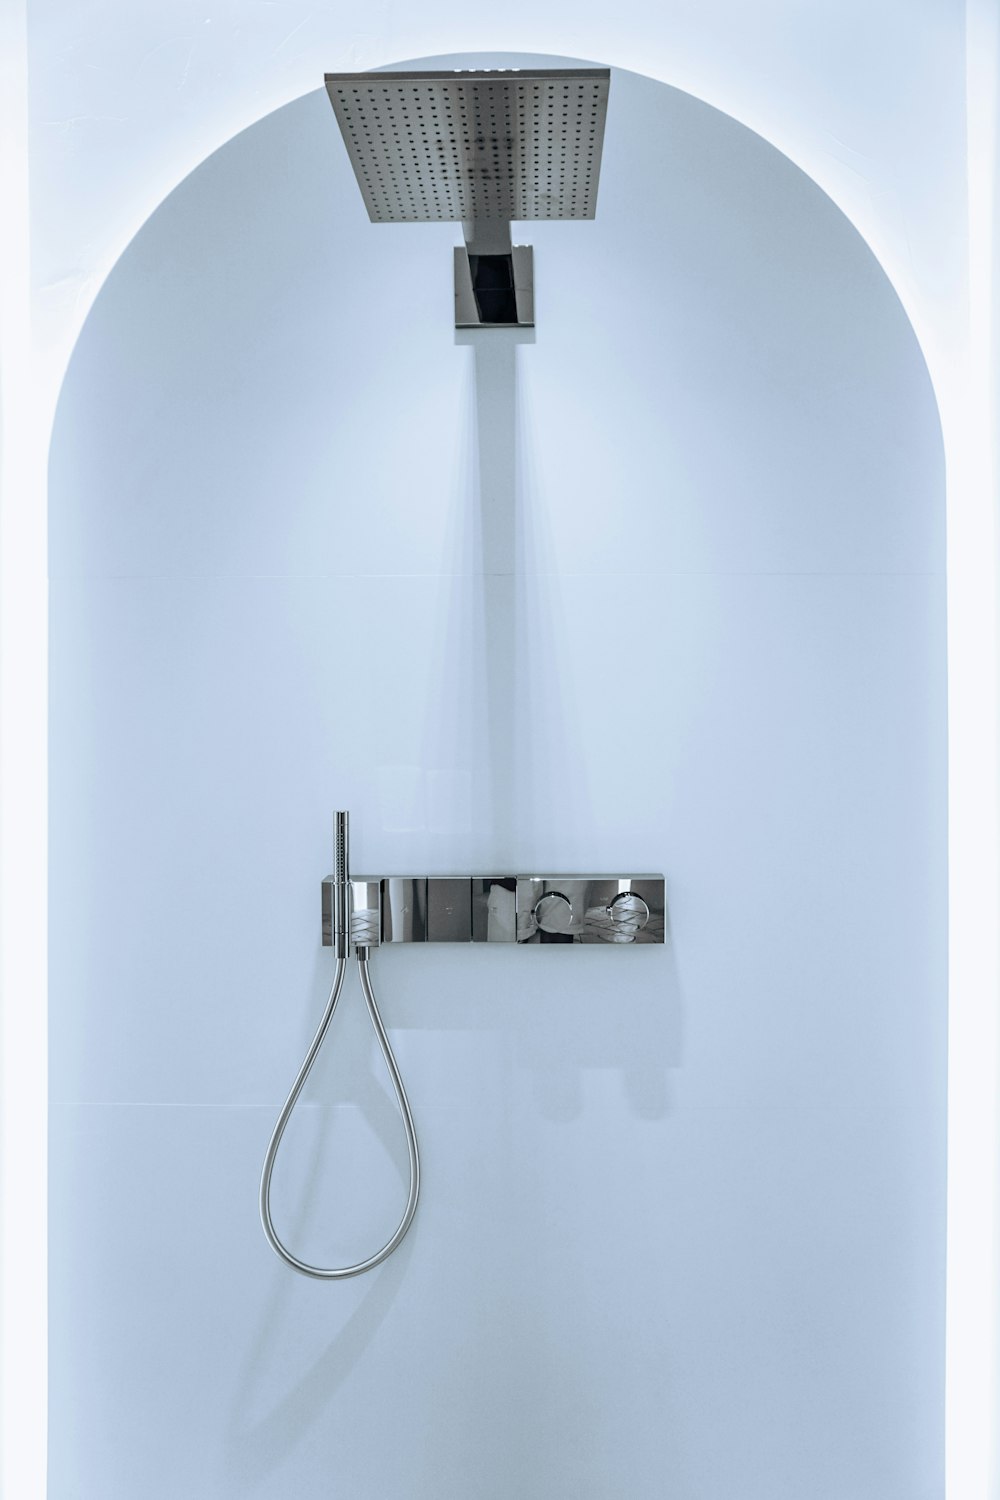 a shower head mounted to the side of a white wall